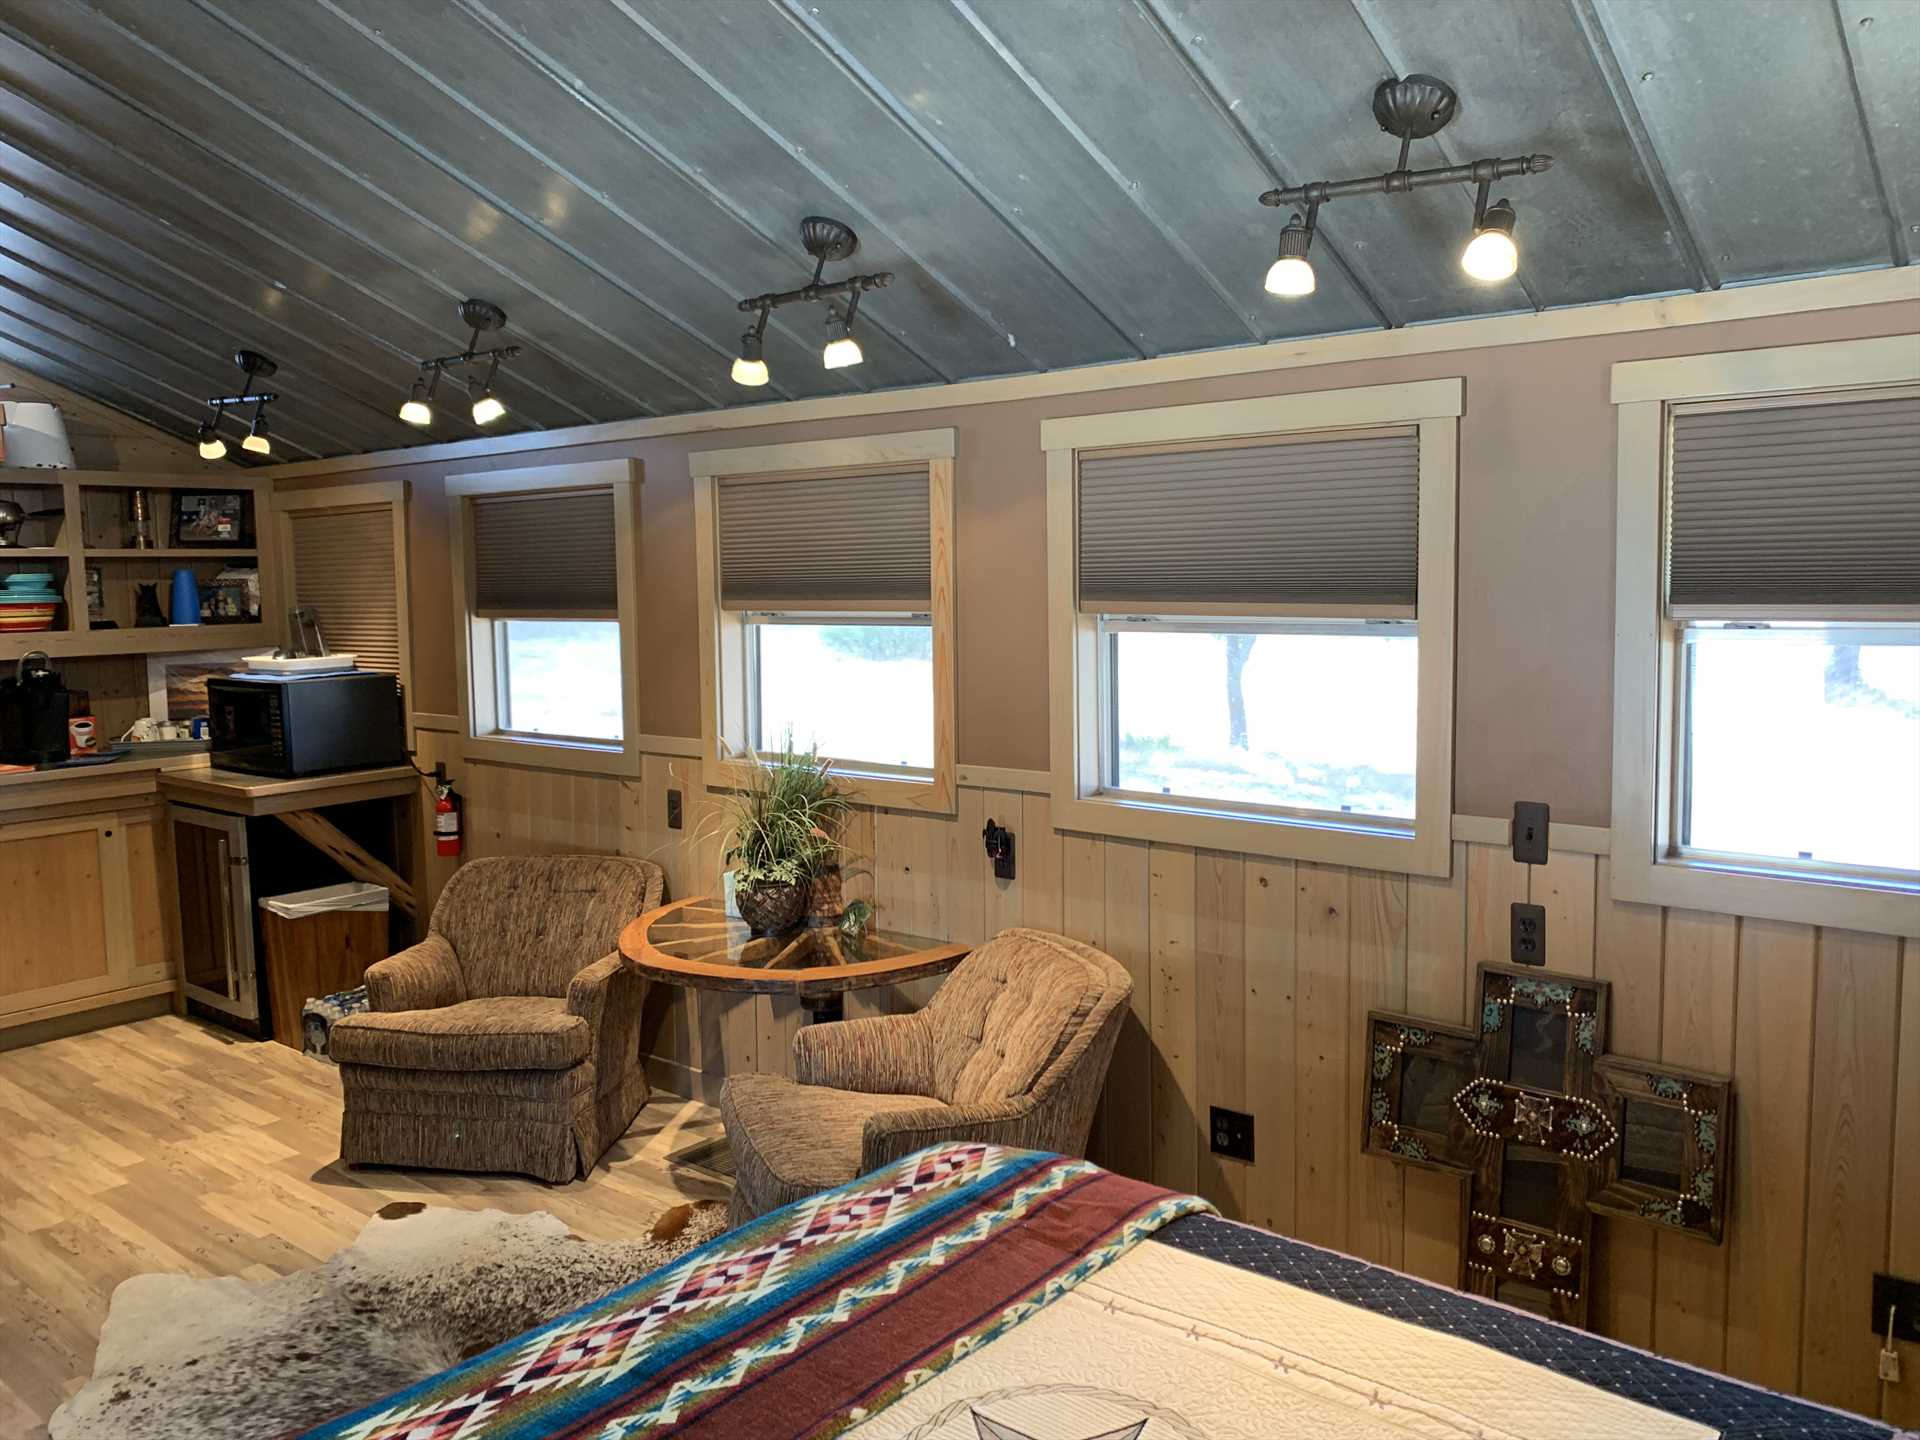                                                 Central air and heat keep every inch of the stylish Star Cabin comfy, no matter what time of year you visit. You'll also have satellite and cable TV and shared Wifi for your tech needs.